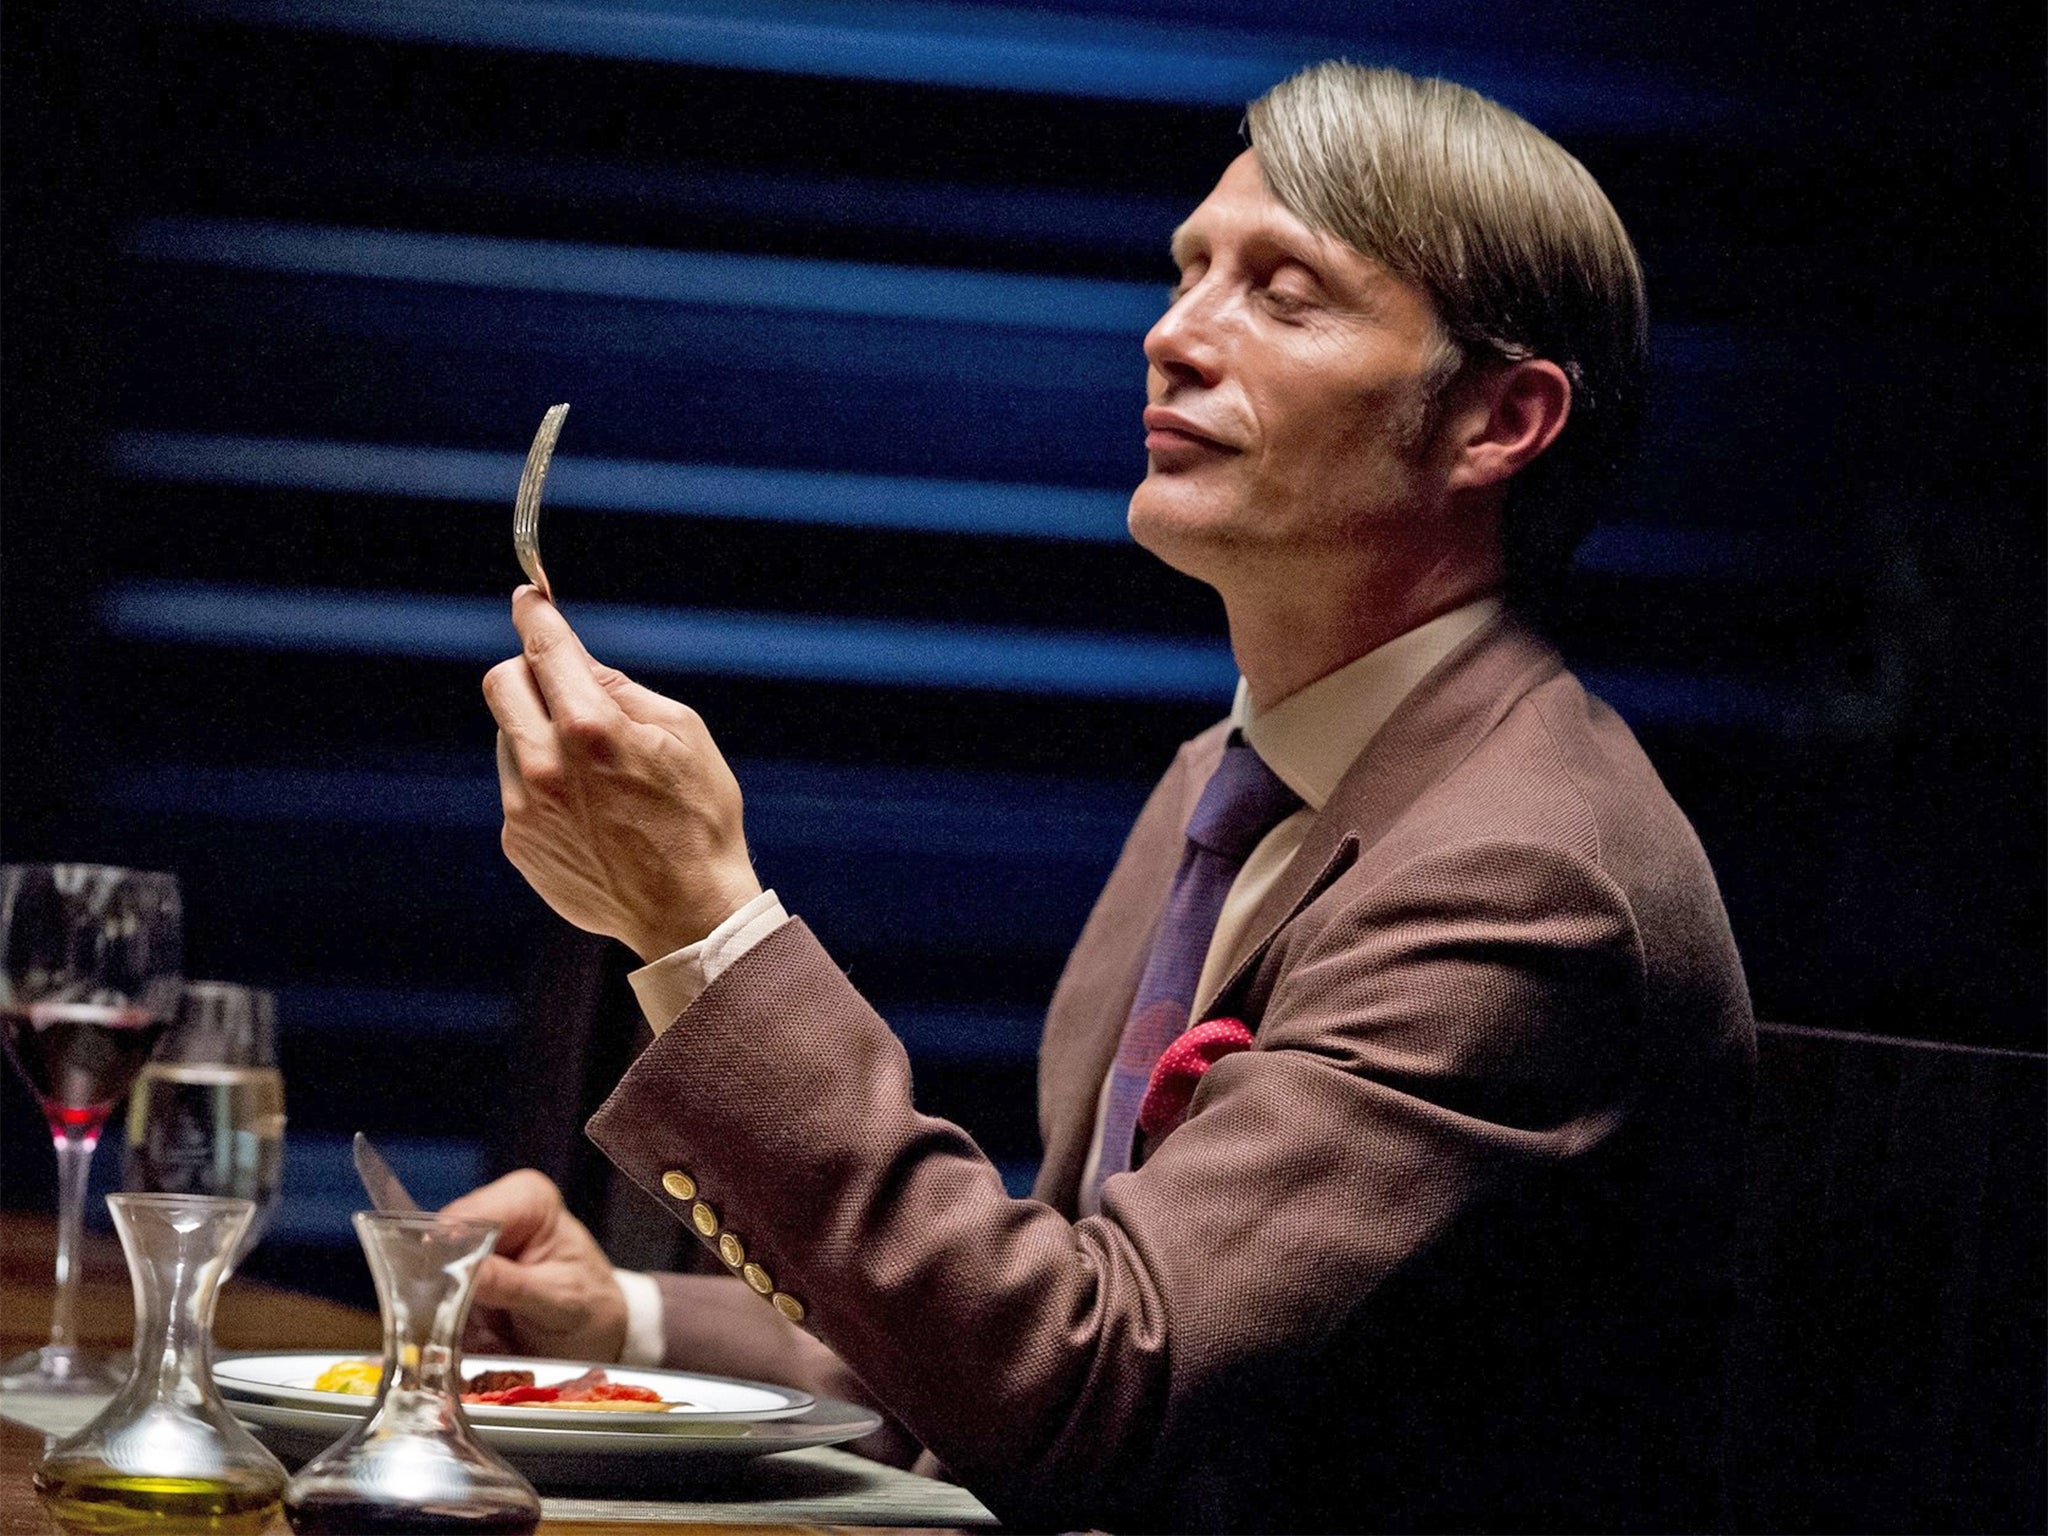 Inappropriate allure: Mads Mikkelsen's incarnation of Hannibal Lecter